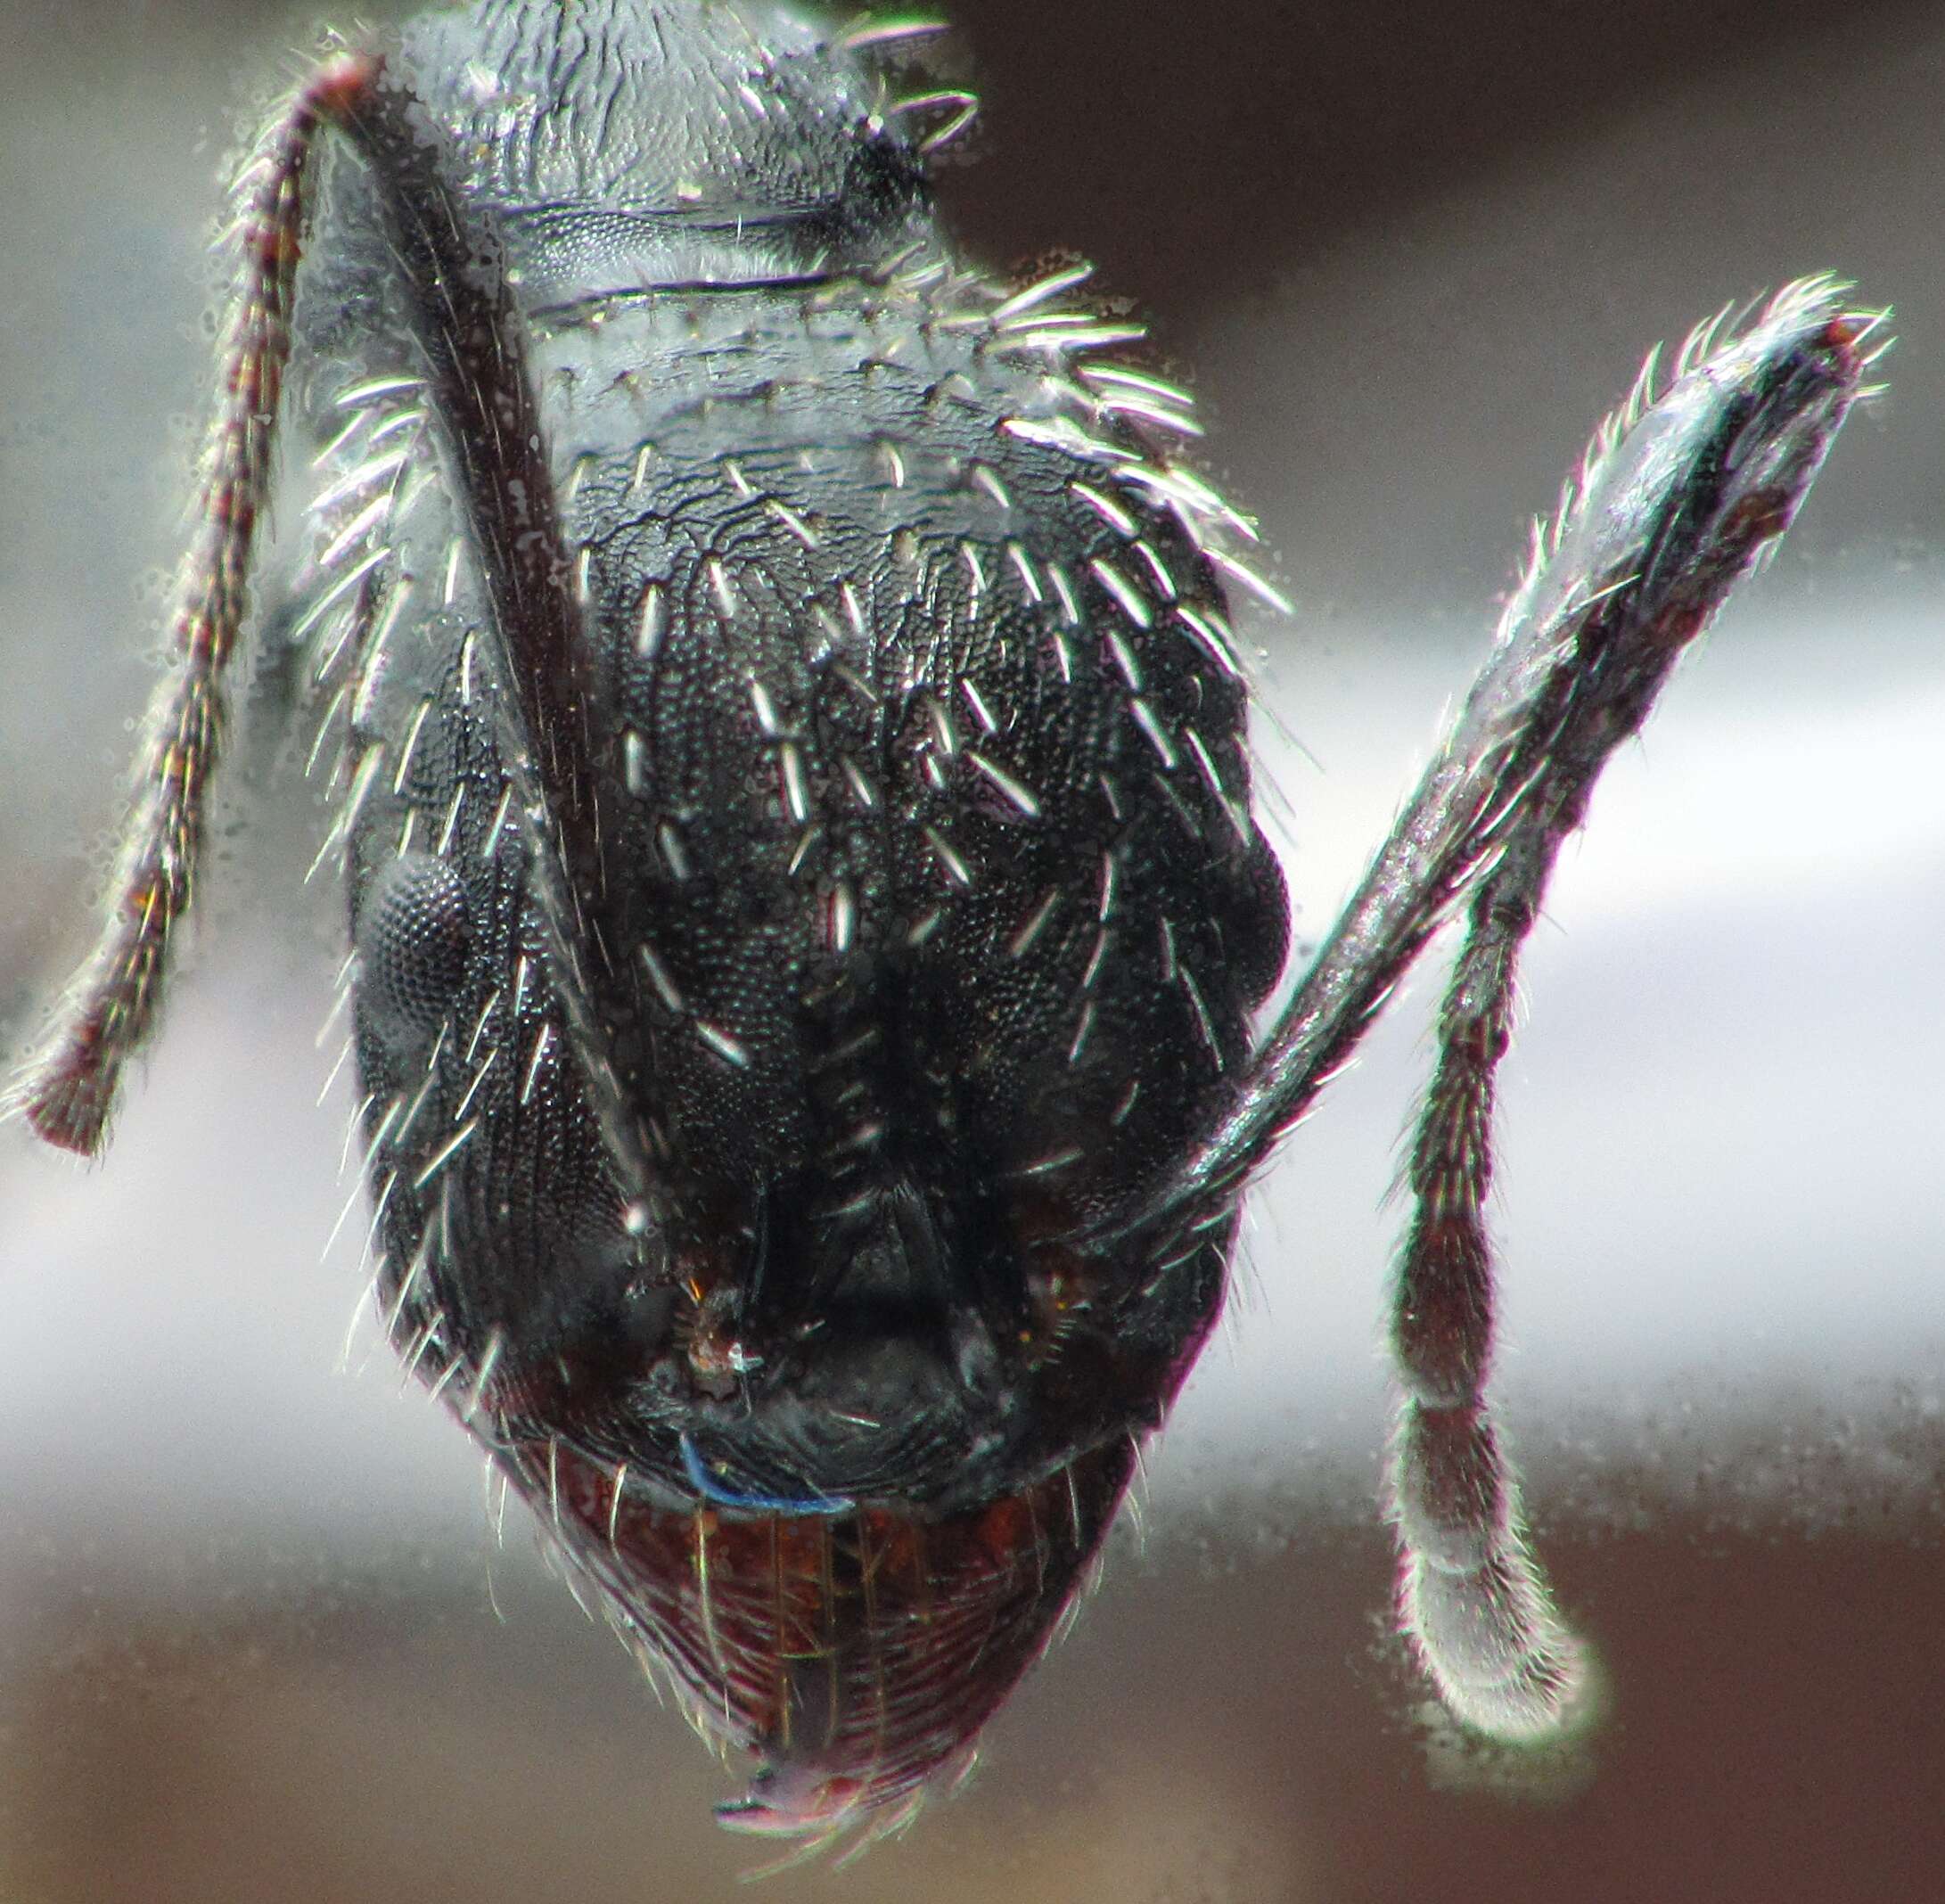 Image of Spine-waisted Ants